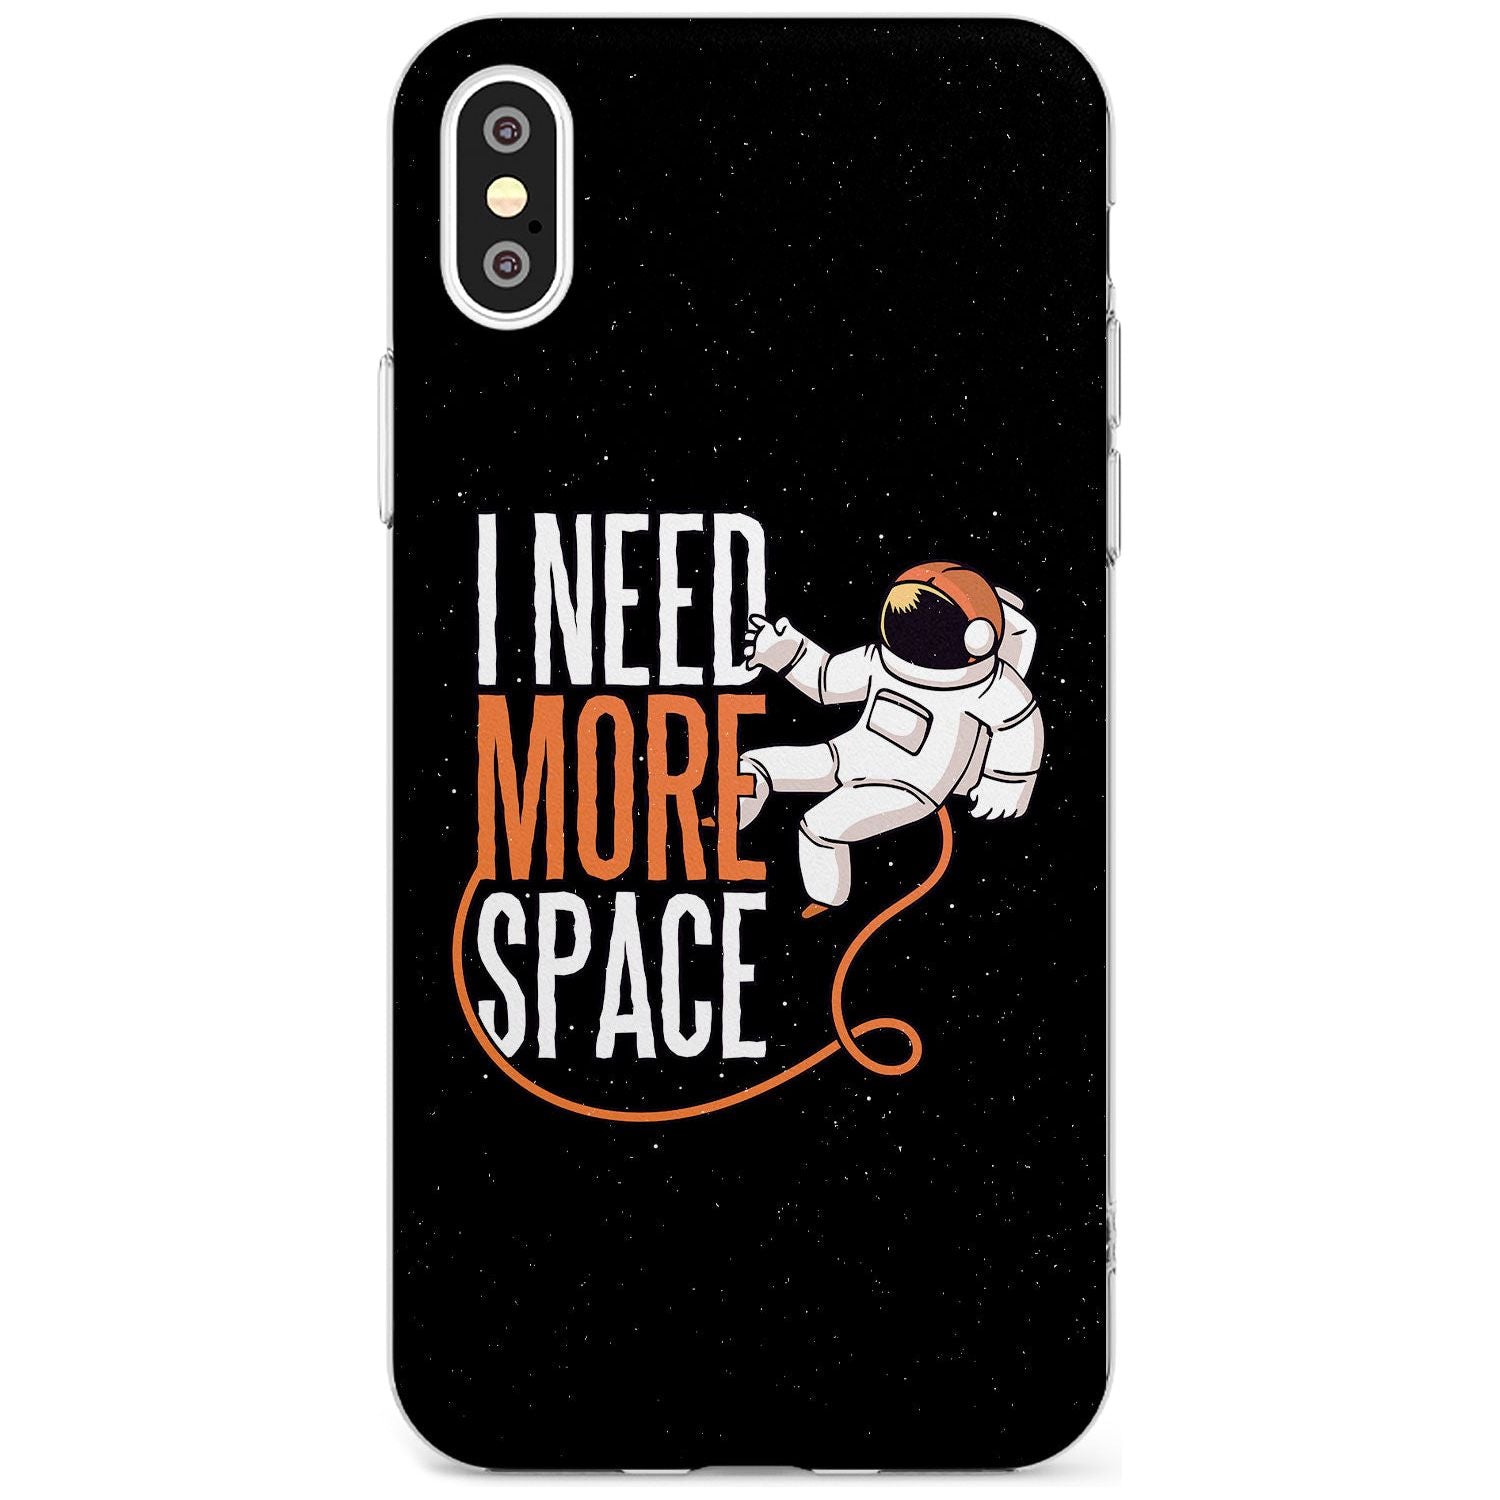 I Need More Space Black Impact Phone Case for iPhone X XS Max XR